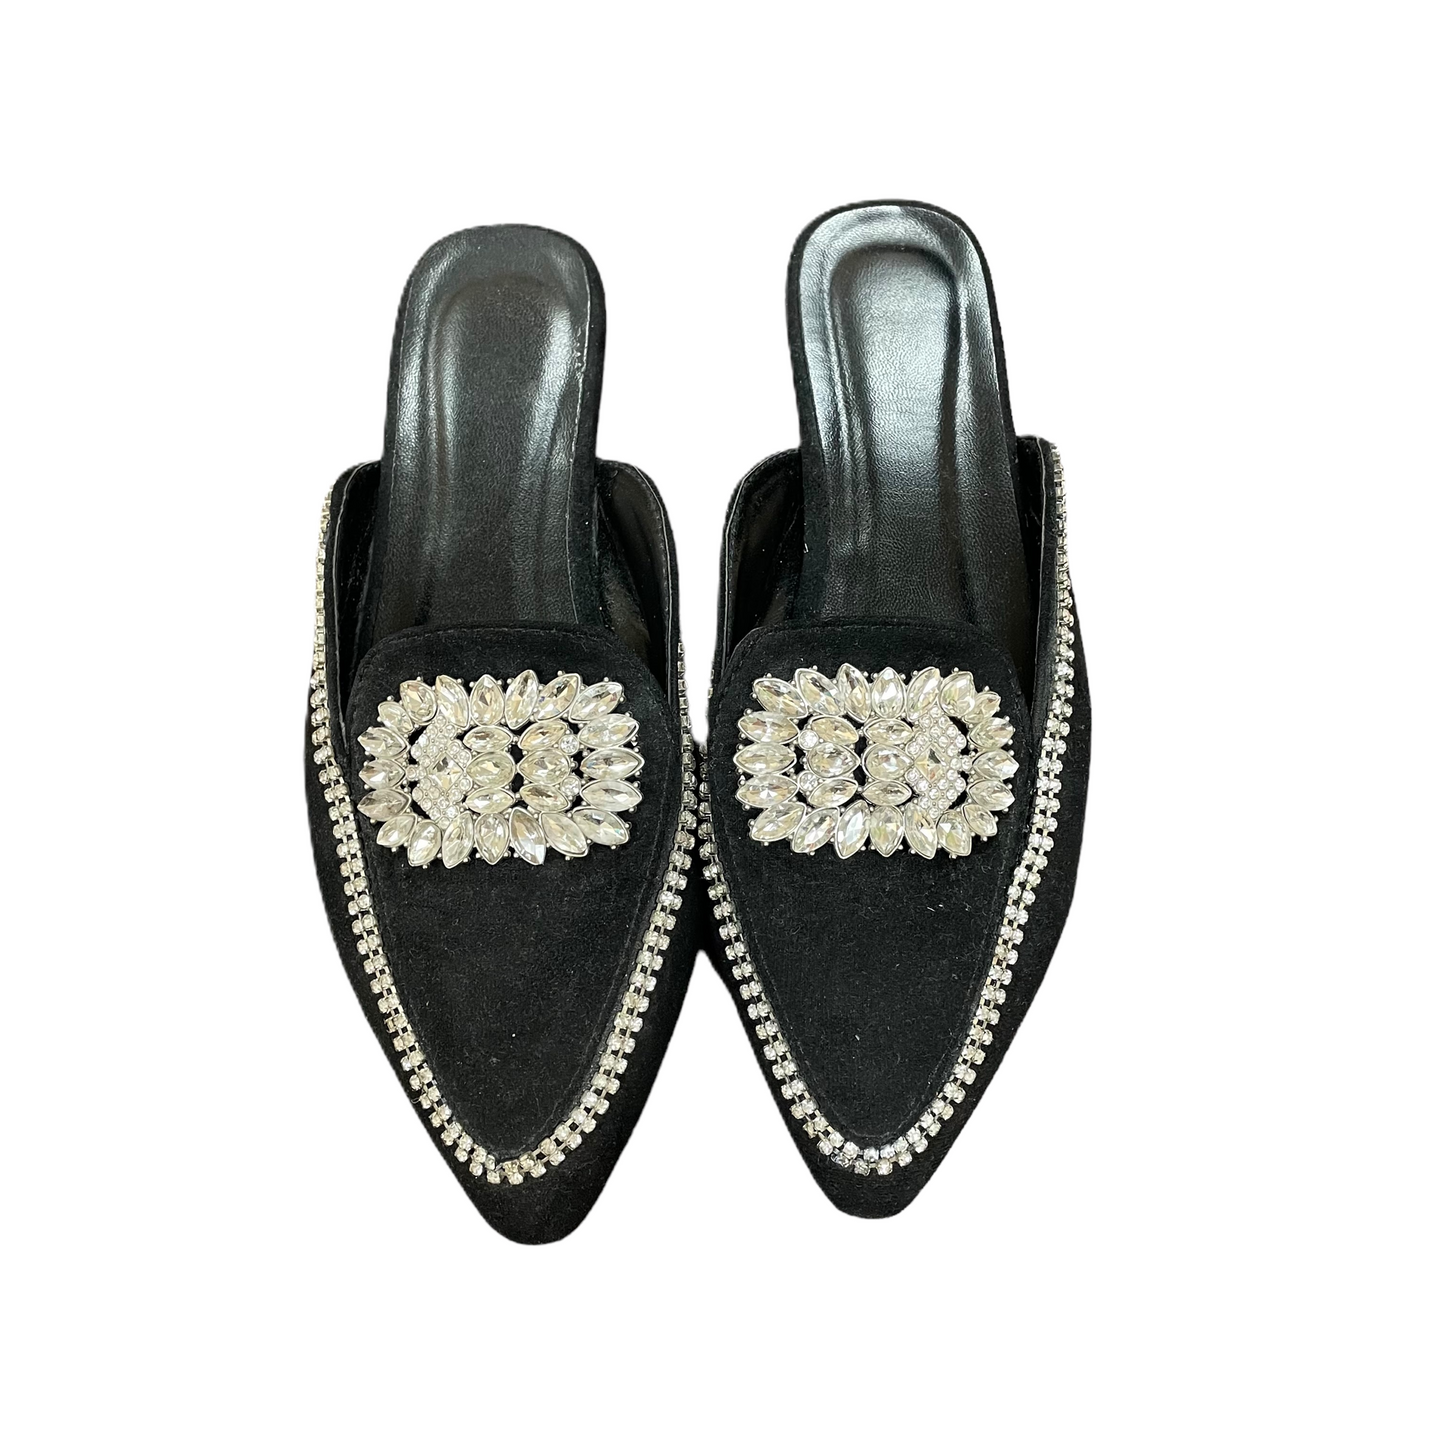 Black Shoes Flats By Cme, Size: 6